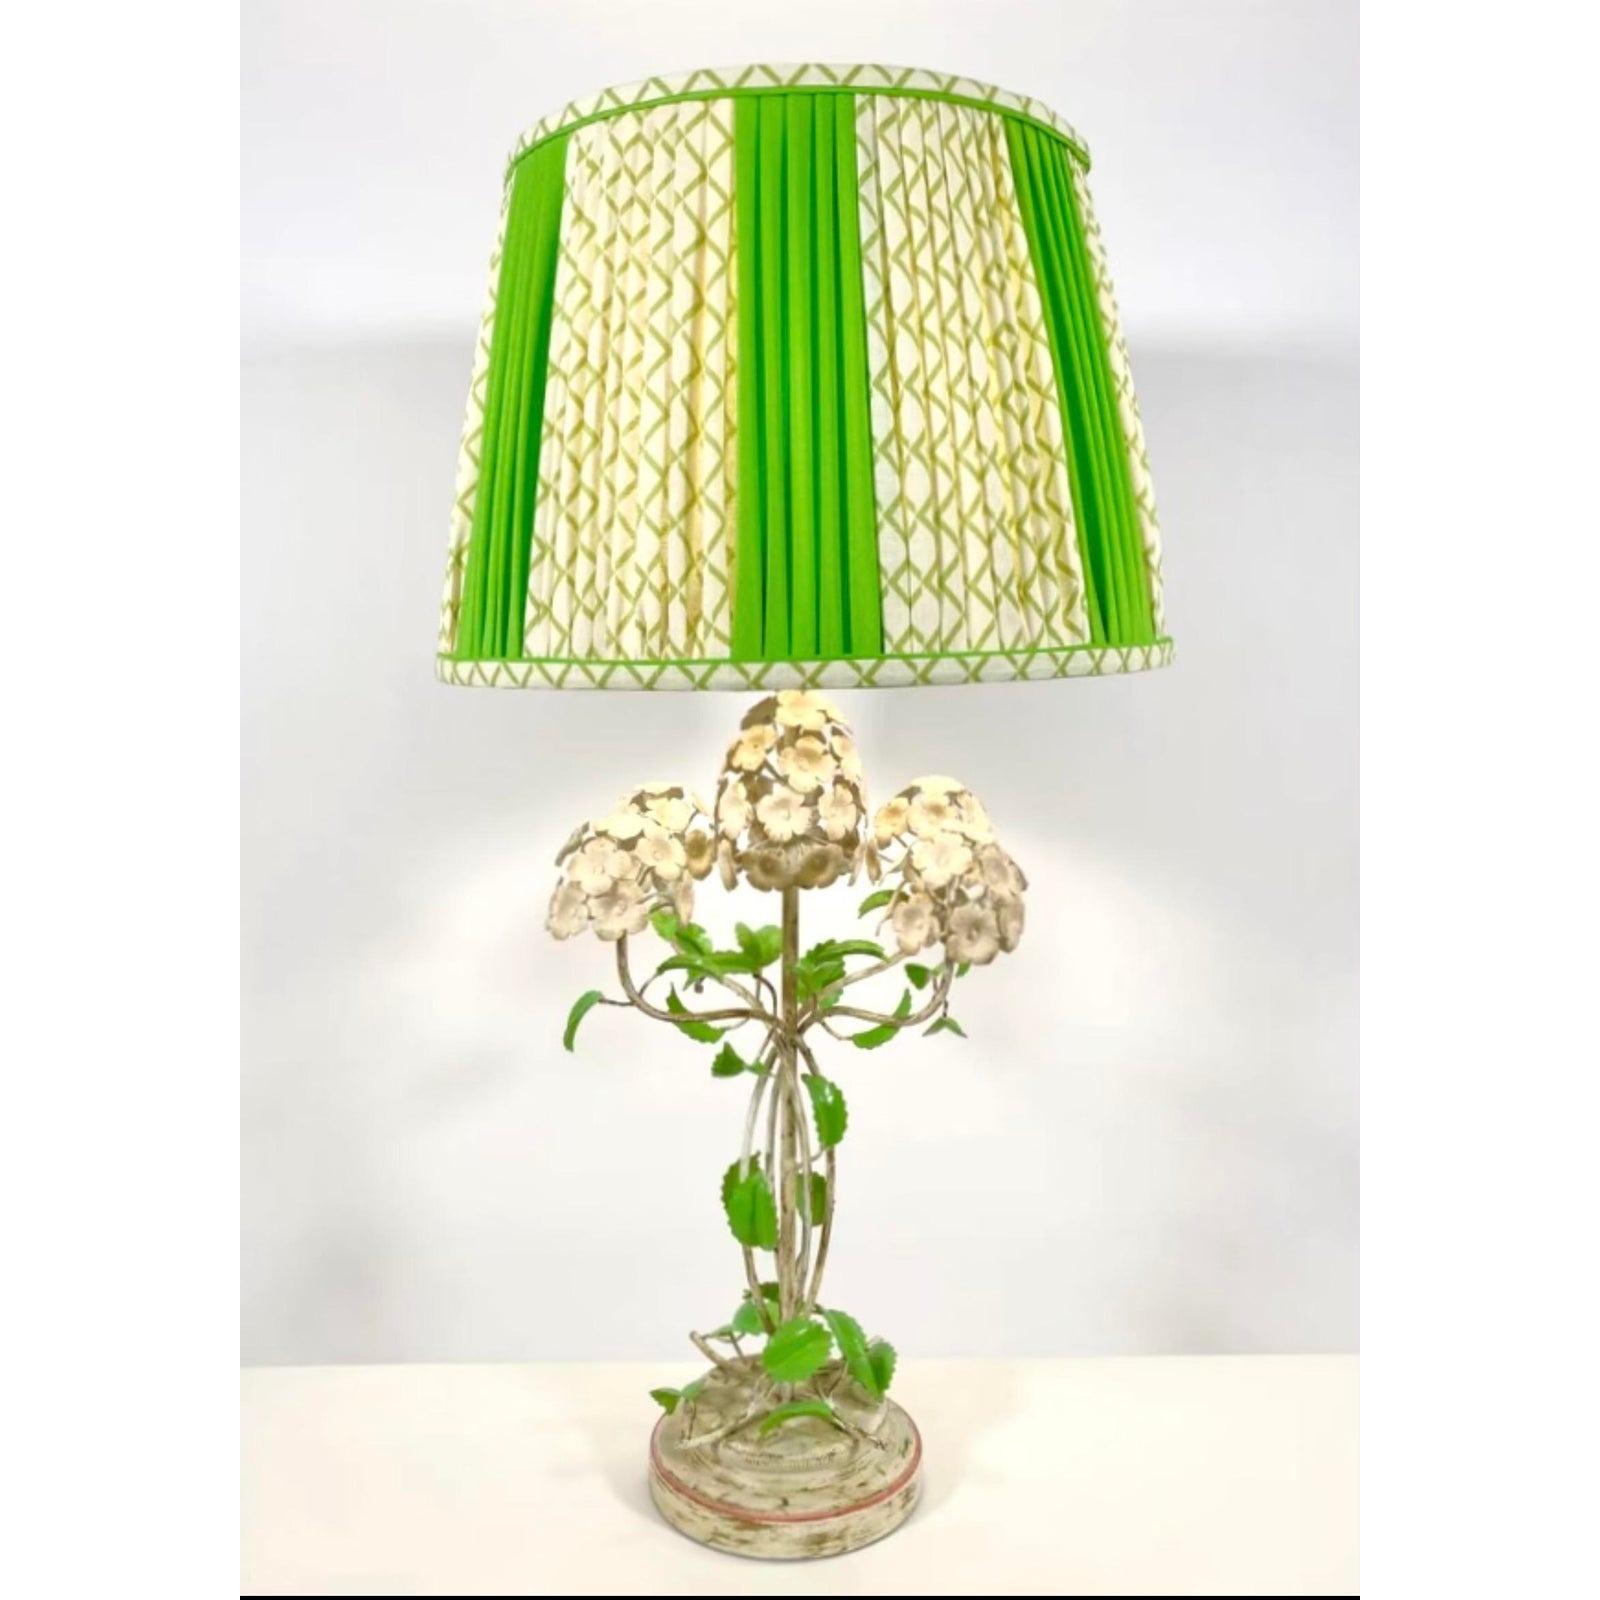 A stunning vintage green and cream colored metal floral lamp. It is a super chic and useful addition to your home. Acquired at a Palm Beach estate.